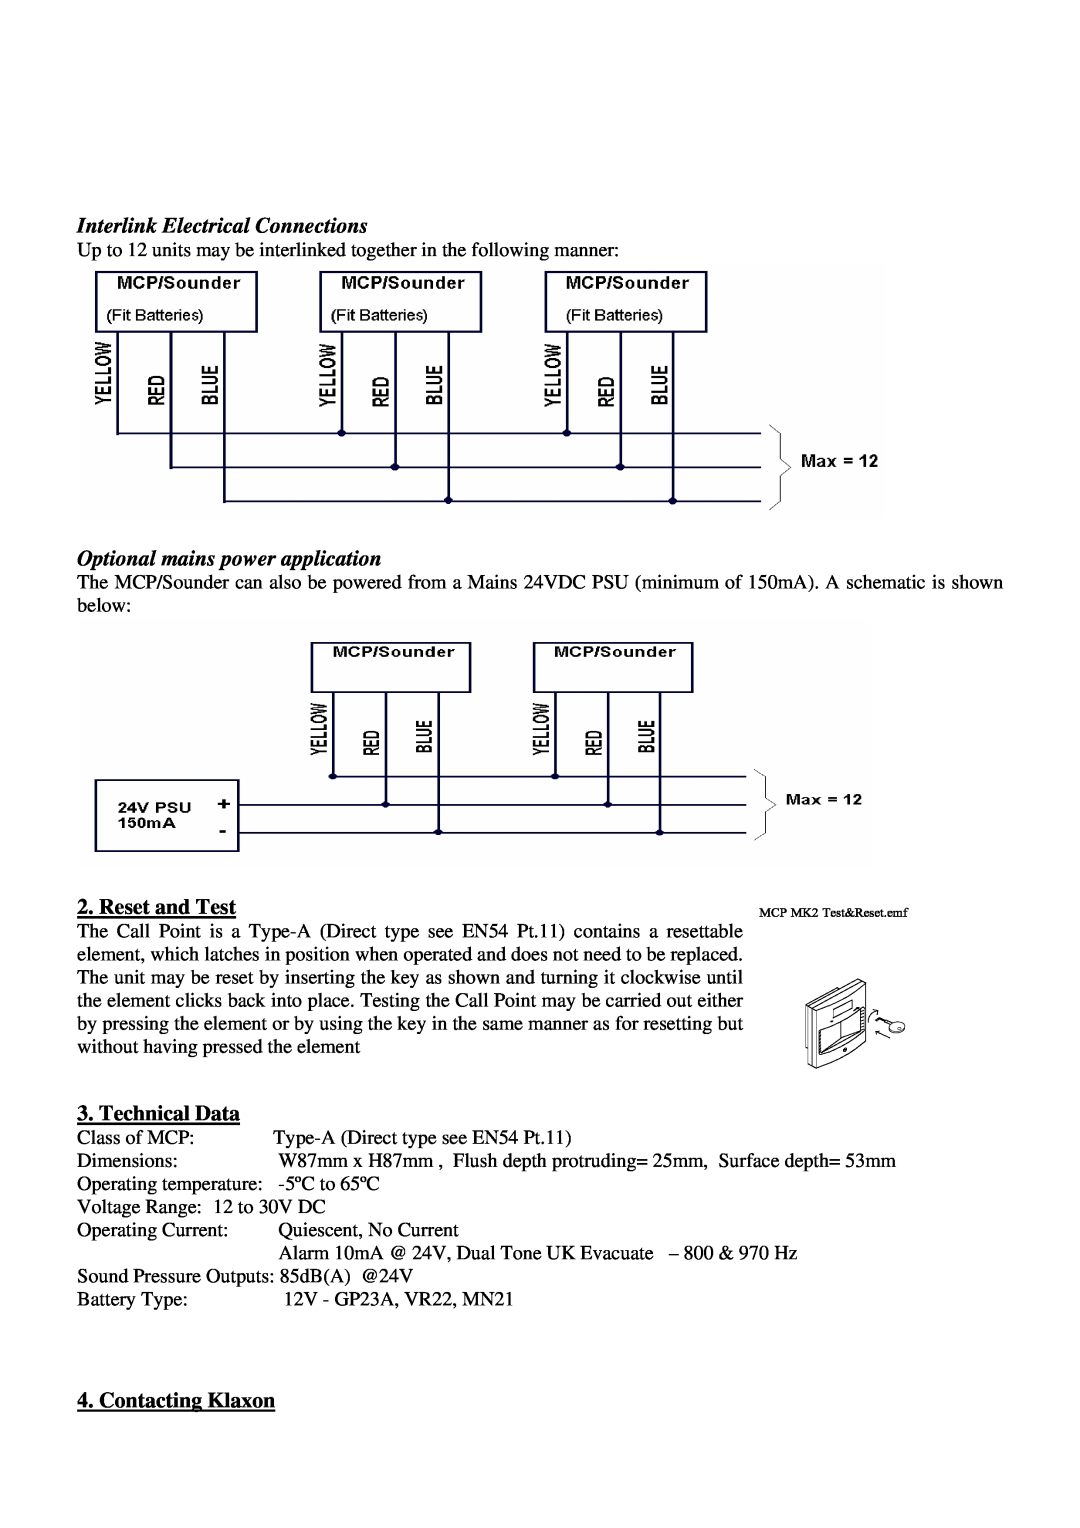 Klaxon 17-970303 manual Interlink Electrical Connections, Optional mains power application, Reset and Test, Technical Data 